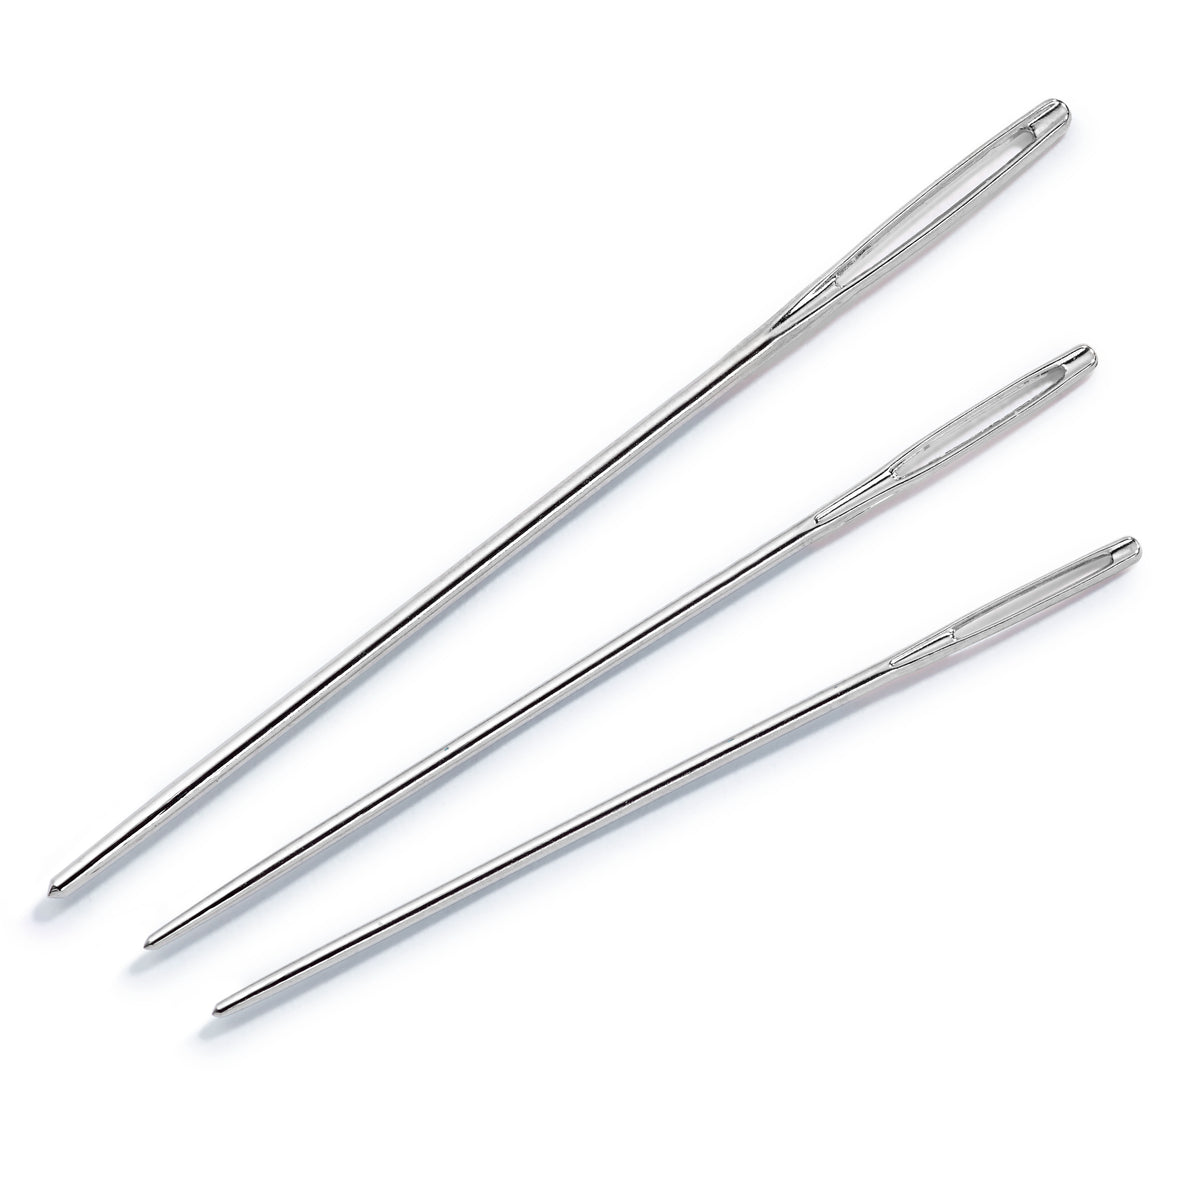 Tapestry Needles with blunt tip